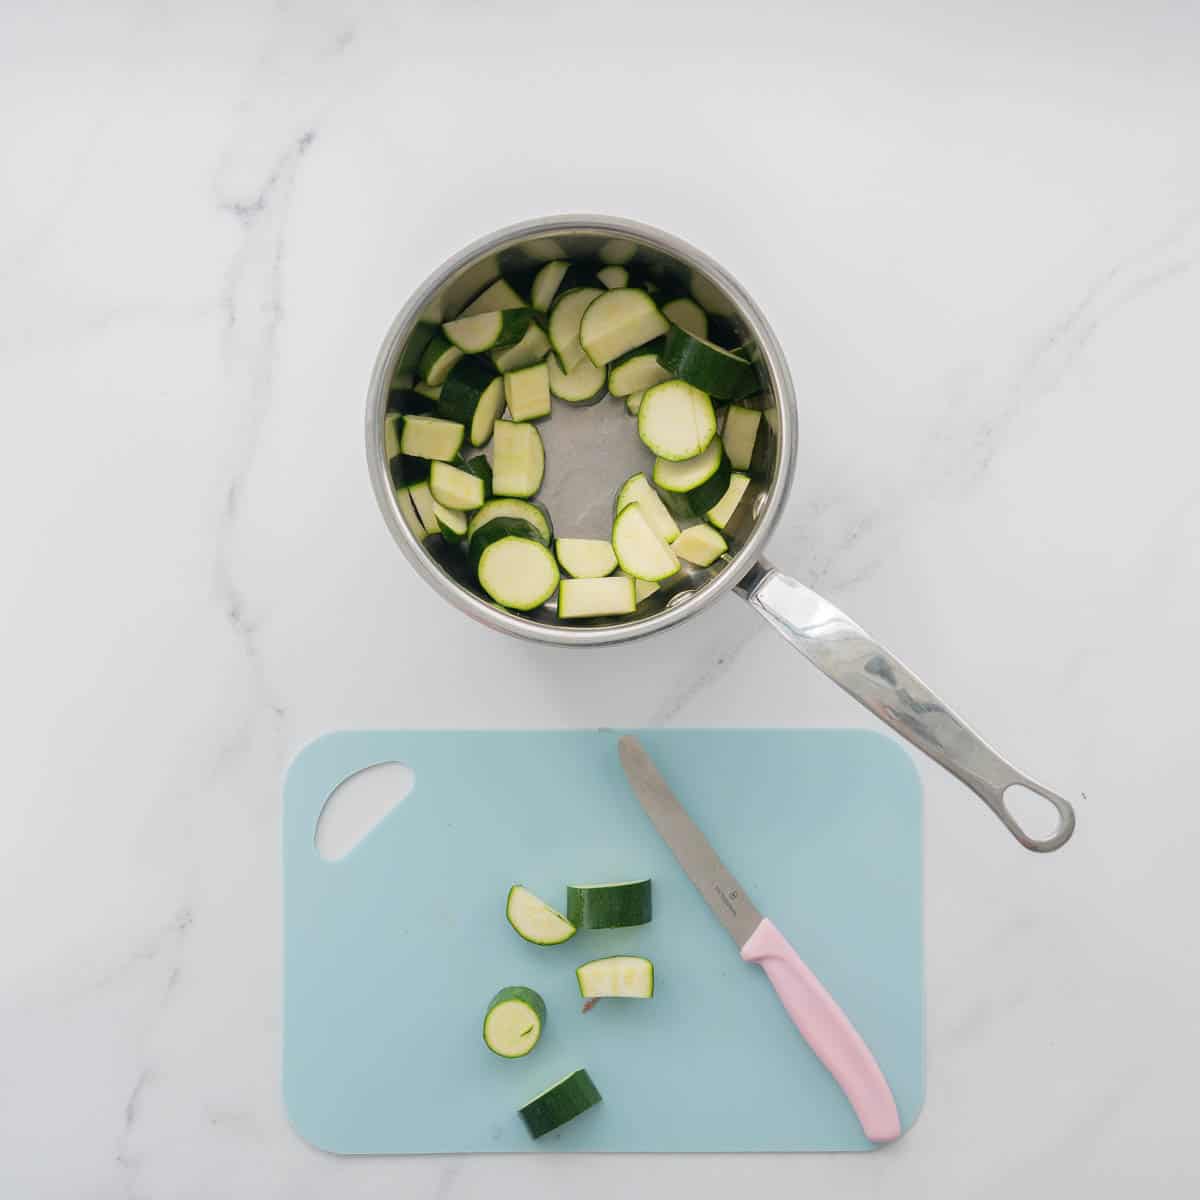 Slices of zucchini in a saucepan, next to a light blue chopping board and a pink handled vegetable knife. 